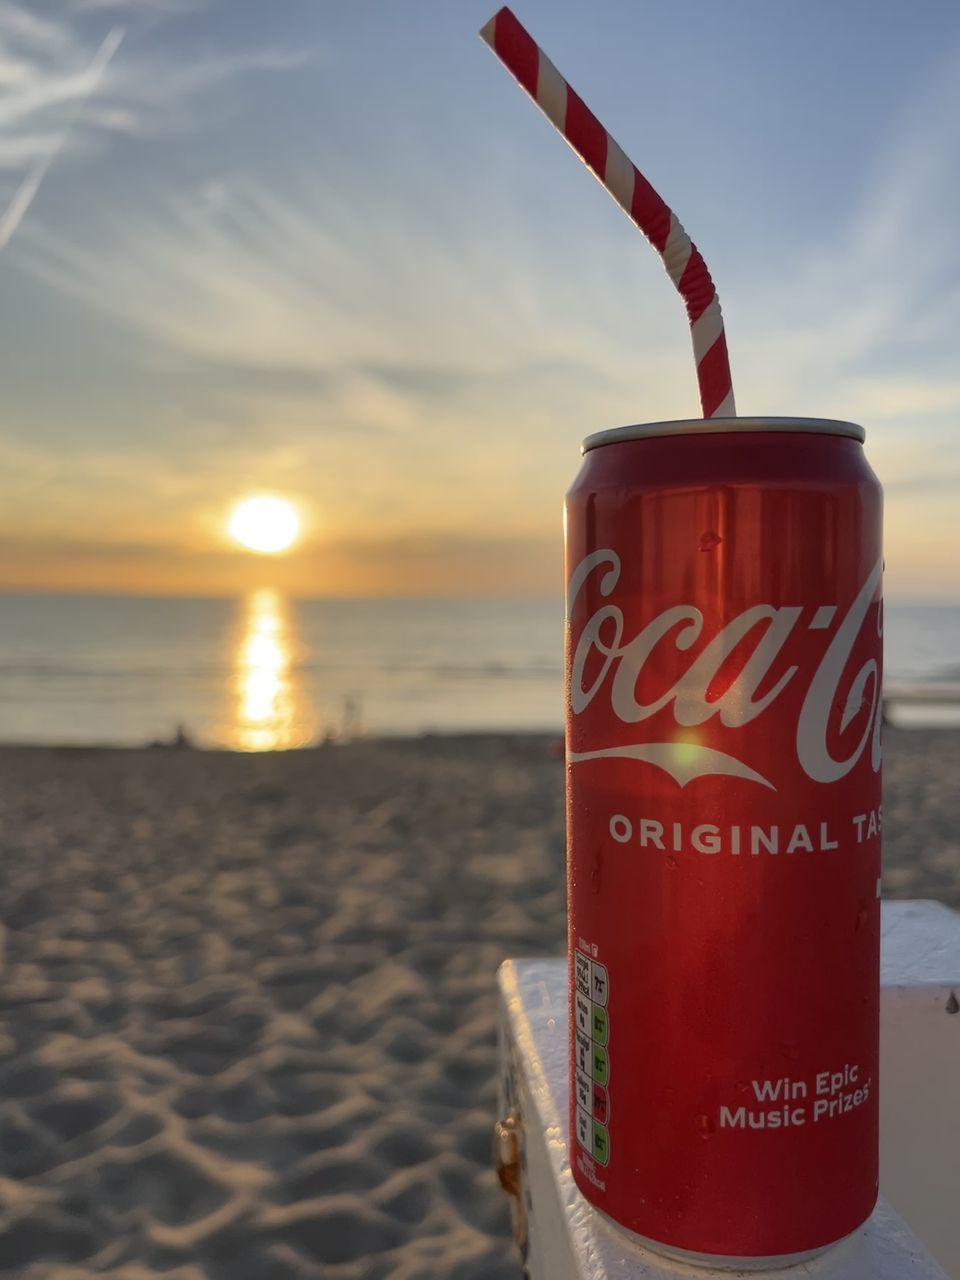 soft drink, beach, sky, drink, land, sea, water, sunset, red, nature, communication, sand, text, alcoholic beverage, cloud, western script, no people, outdoors, food and drink, vacation, focus on foreground, beauty in nature, trip, travel destinations, holiday, horizon, horizon over water, scenics - nature, sign, summer, travel, refreshment, sunlight, tranquility